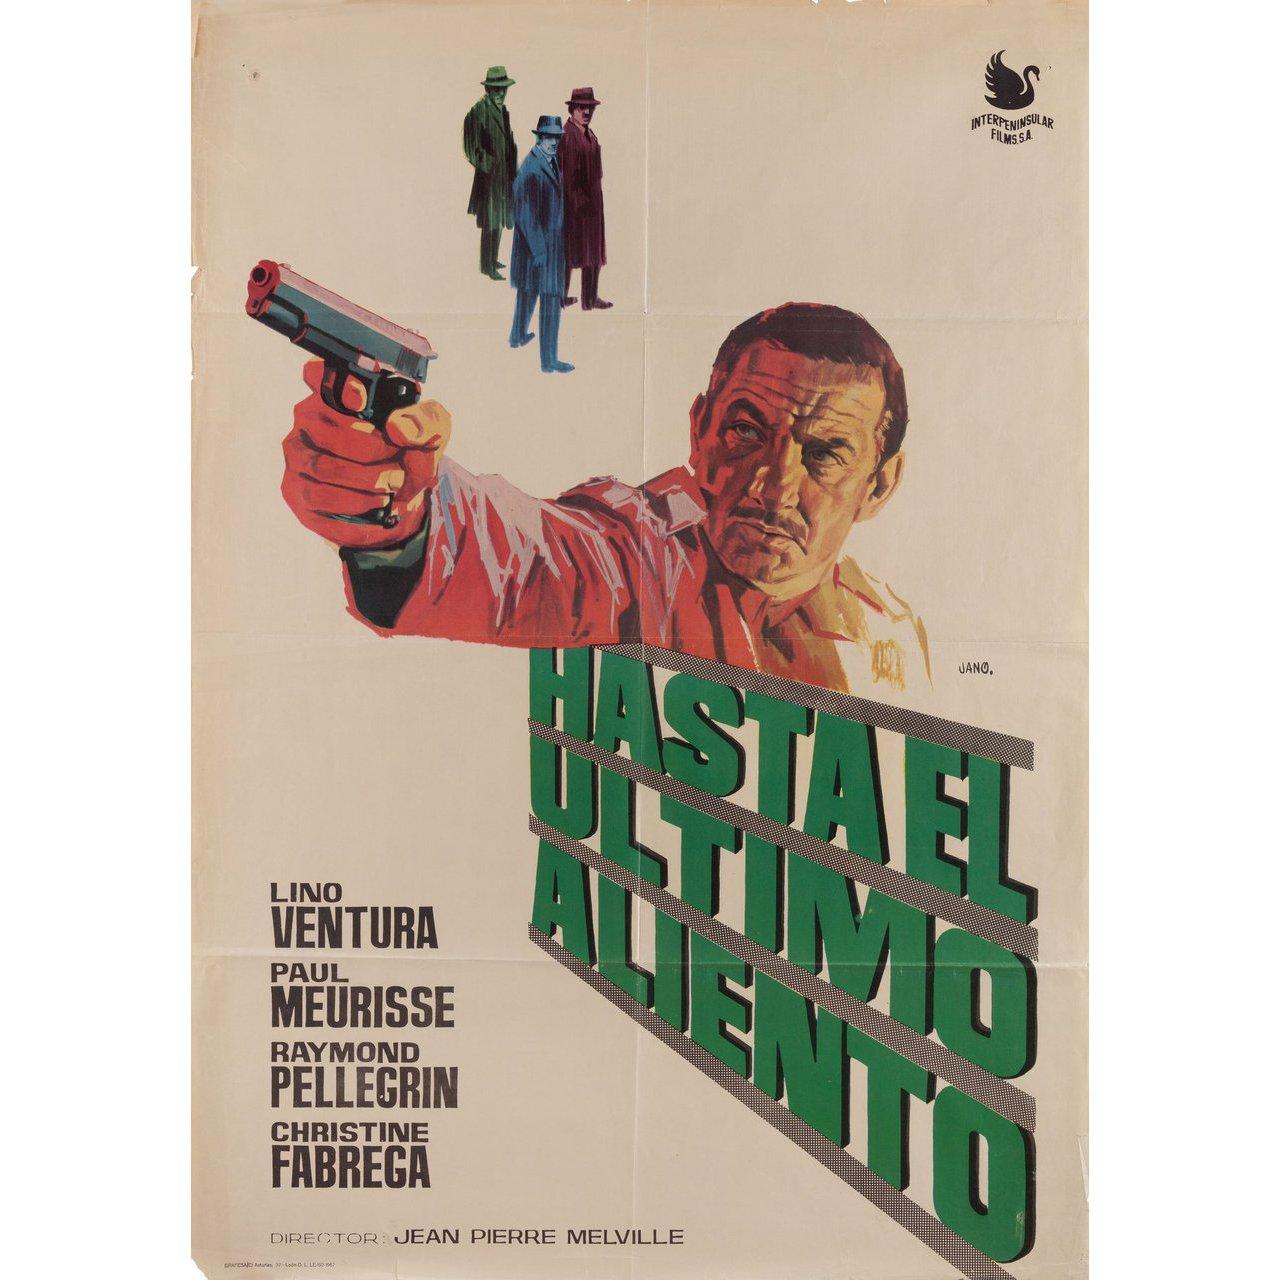 Original 1967 Spanish B1 poster by Jano for the film Second Breath (Le Deuxieme Souffle) directed by Jean-Pierre Melville with Lino Ventura / Paul Meurisse / Raymond Pellegrin / Christine Fabrega. Very Good condition, folded. Many original posters